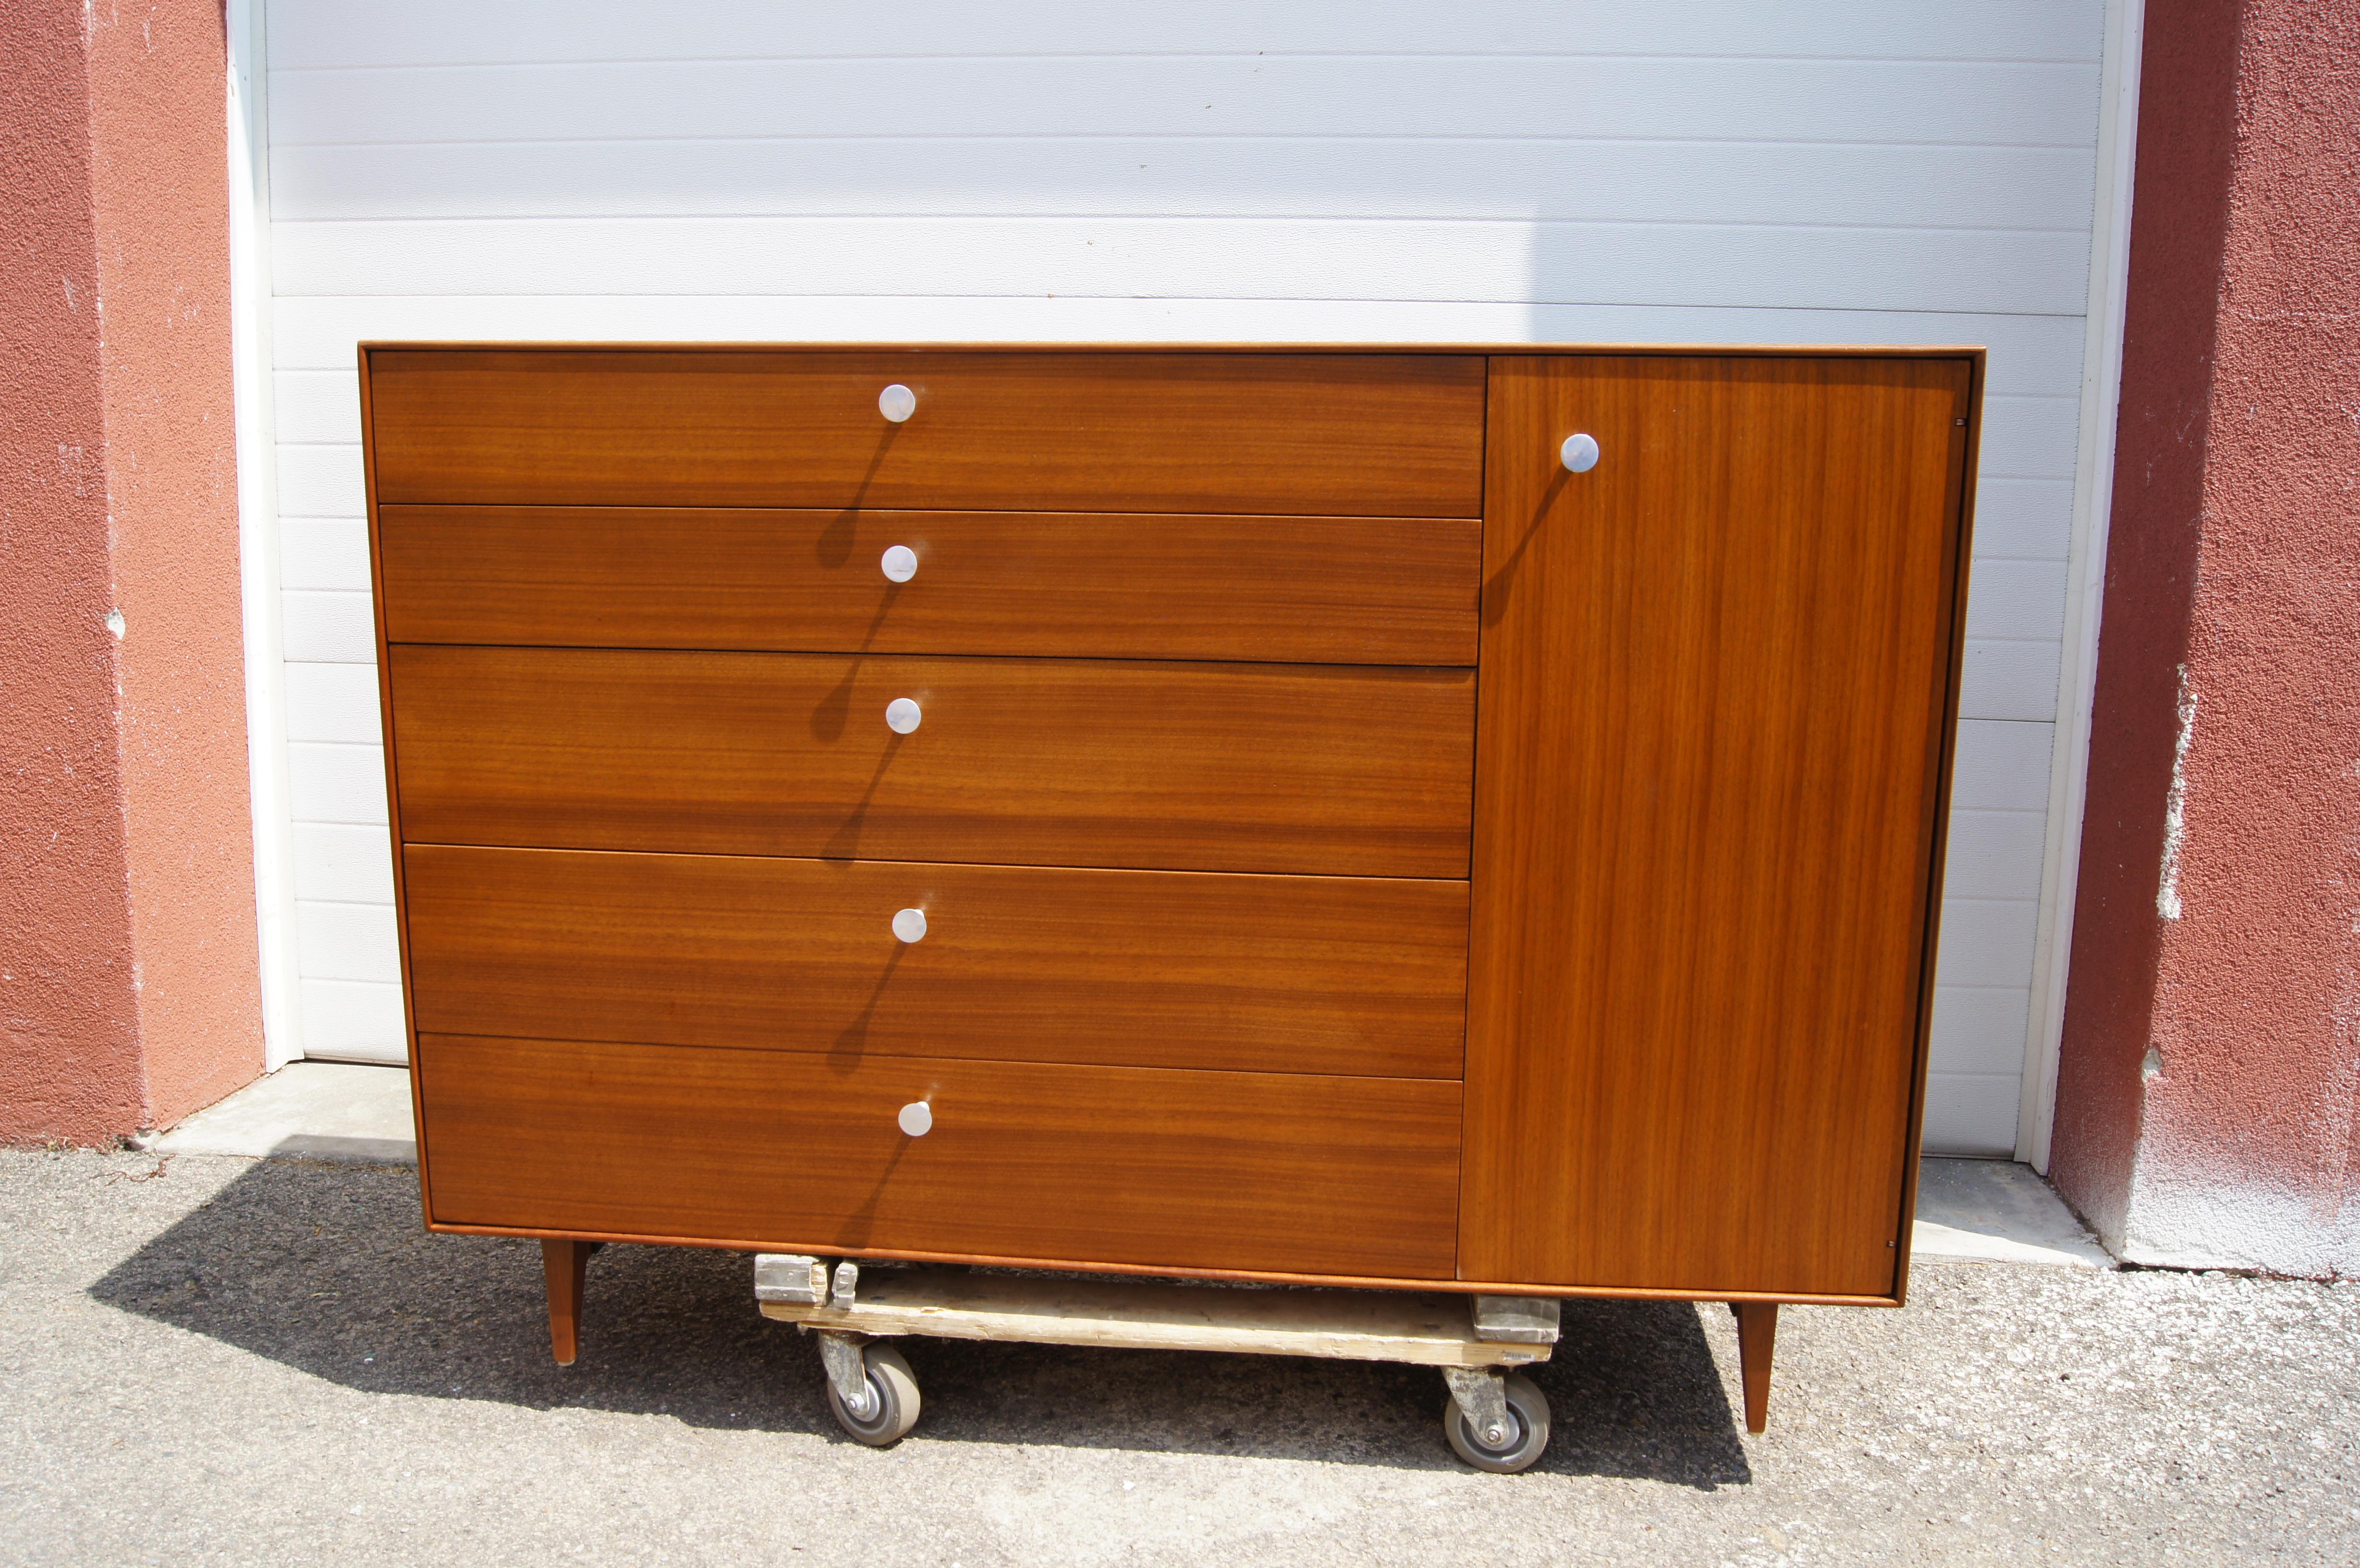 This gorgeous dresser is part of George Nelson's 1950s Thin Edge collection for Herman Miller, which takes its name from the elegant, slim profile. Tapered trestle legs elevate the walnut case, with five graduated drawers, the topmost of which is